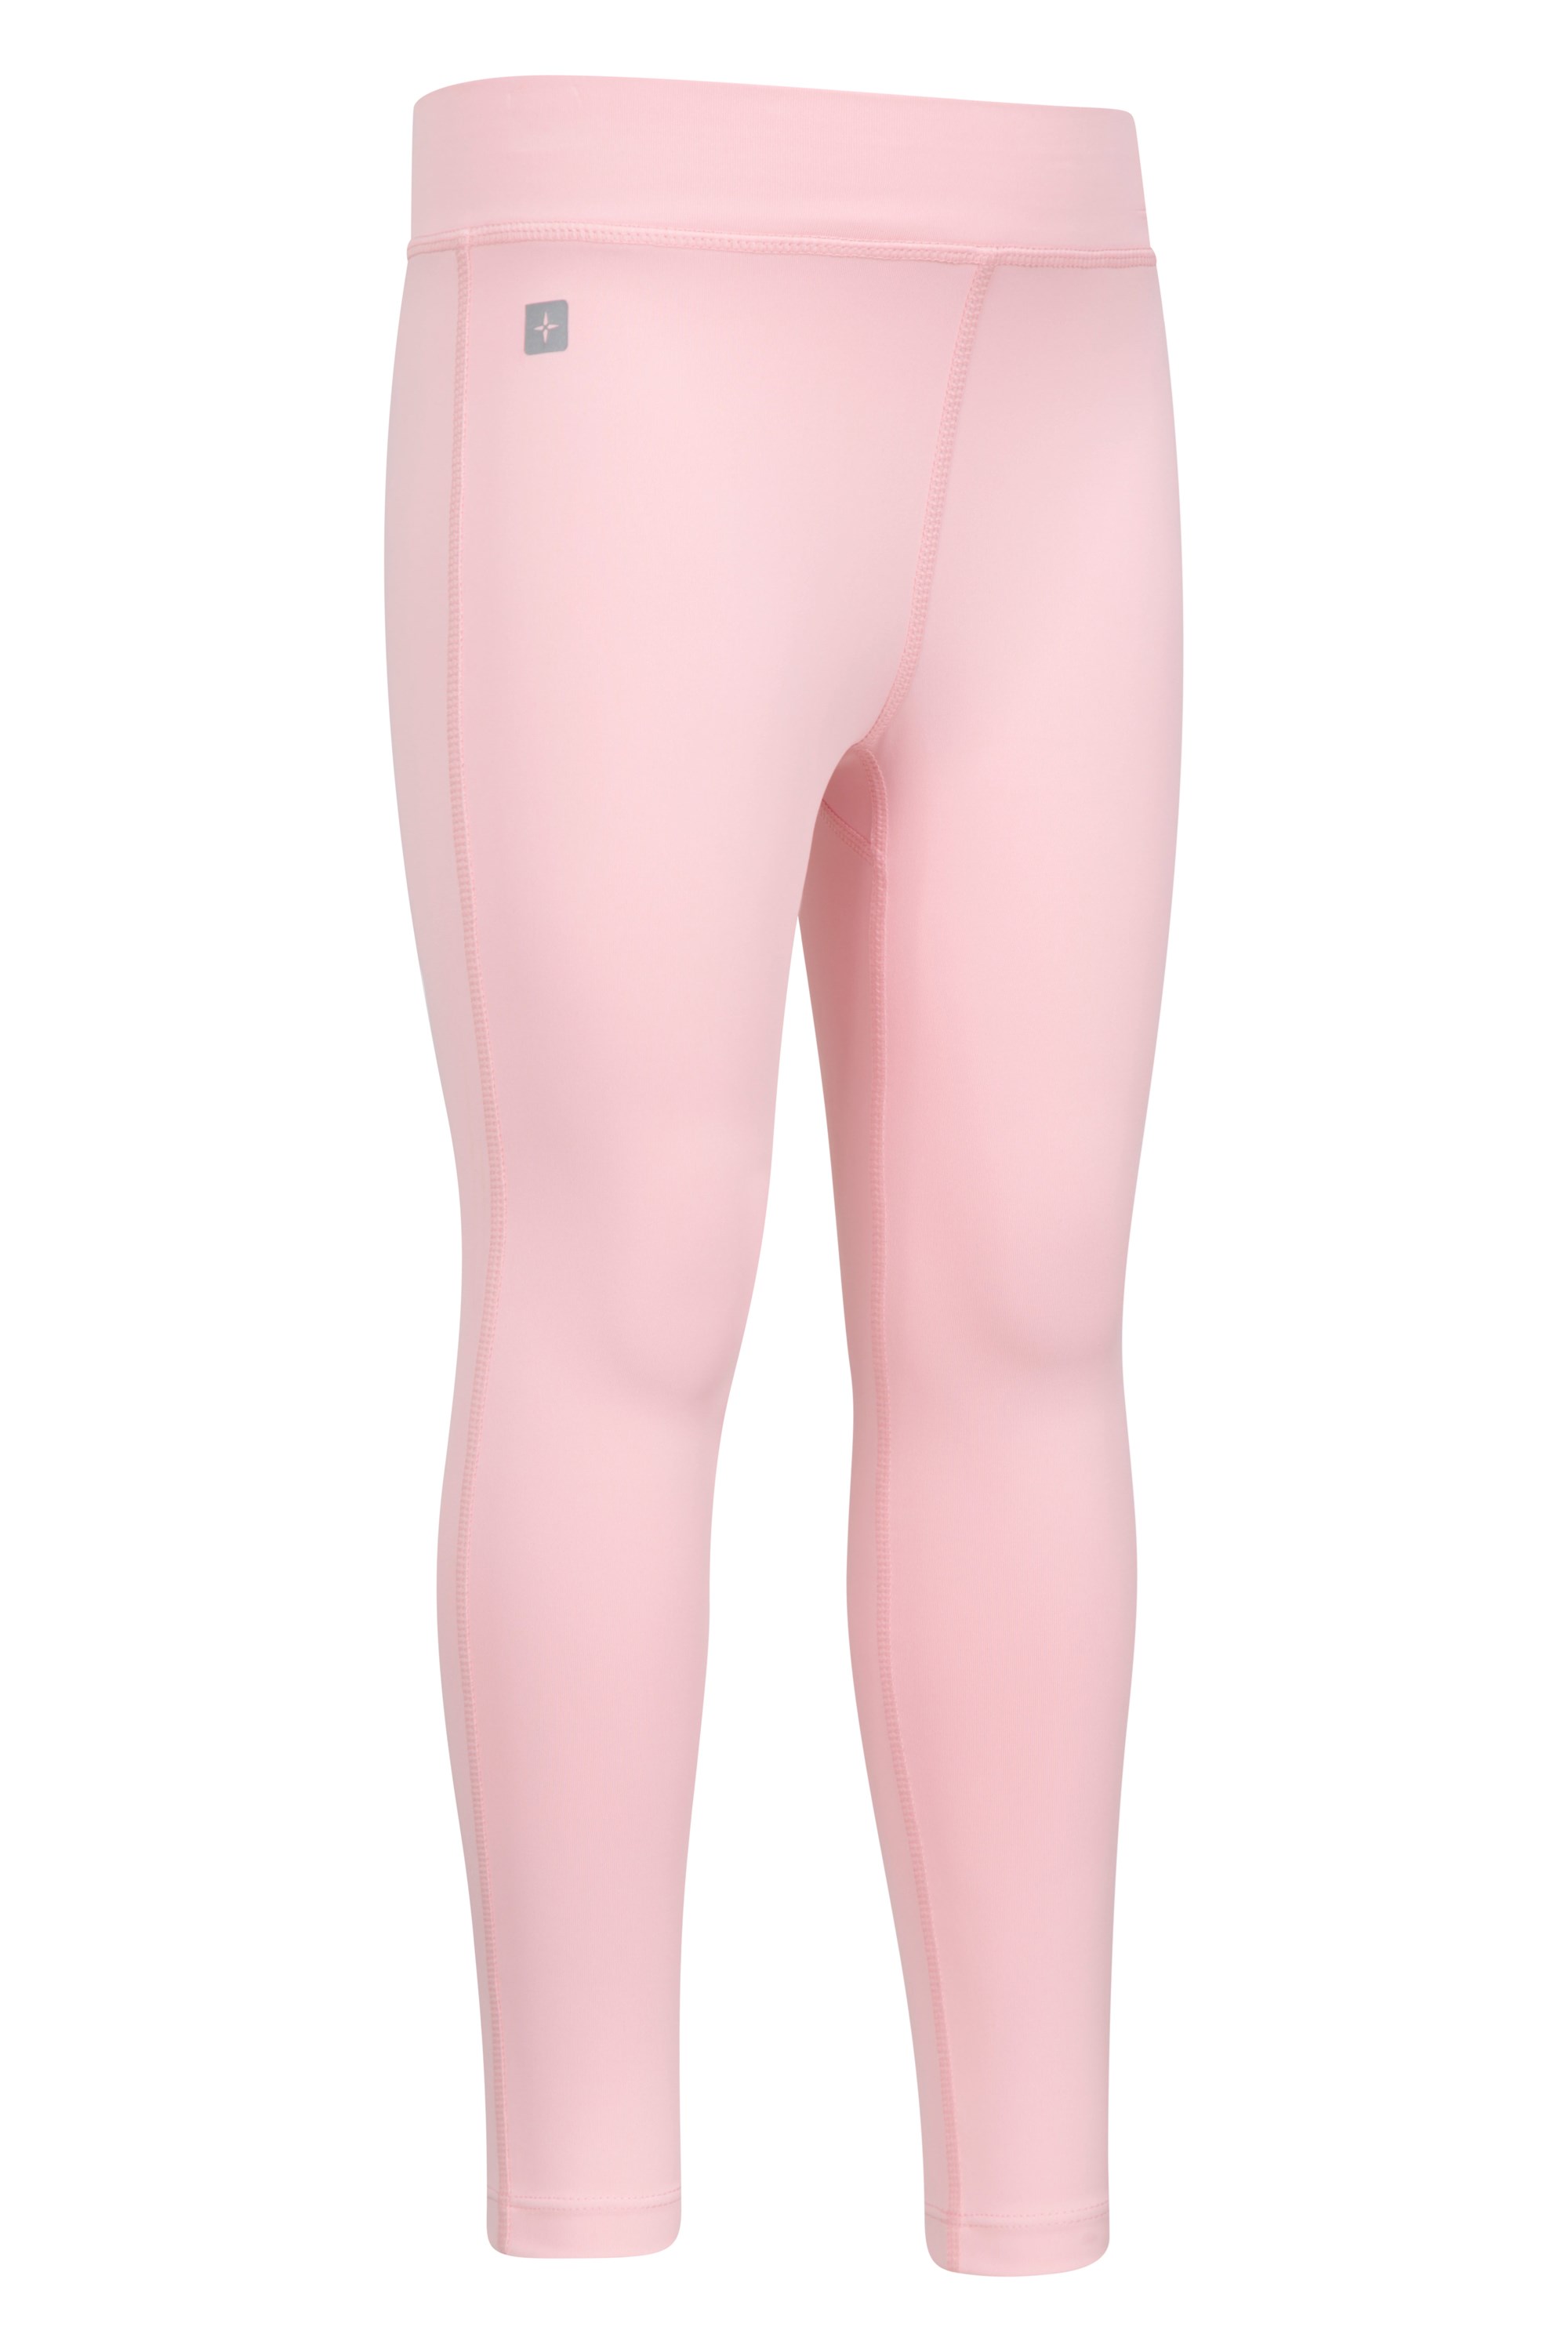 Winter Striped Childrens Thermal Leggings For Women And Kids Thick, Warm,  And Comfortable Home Pants For Boys And Girls Ages 2 18 Teen And Child  Clothes Included L231005 From Bingcoholnciaga, $5.19